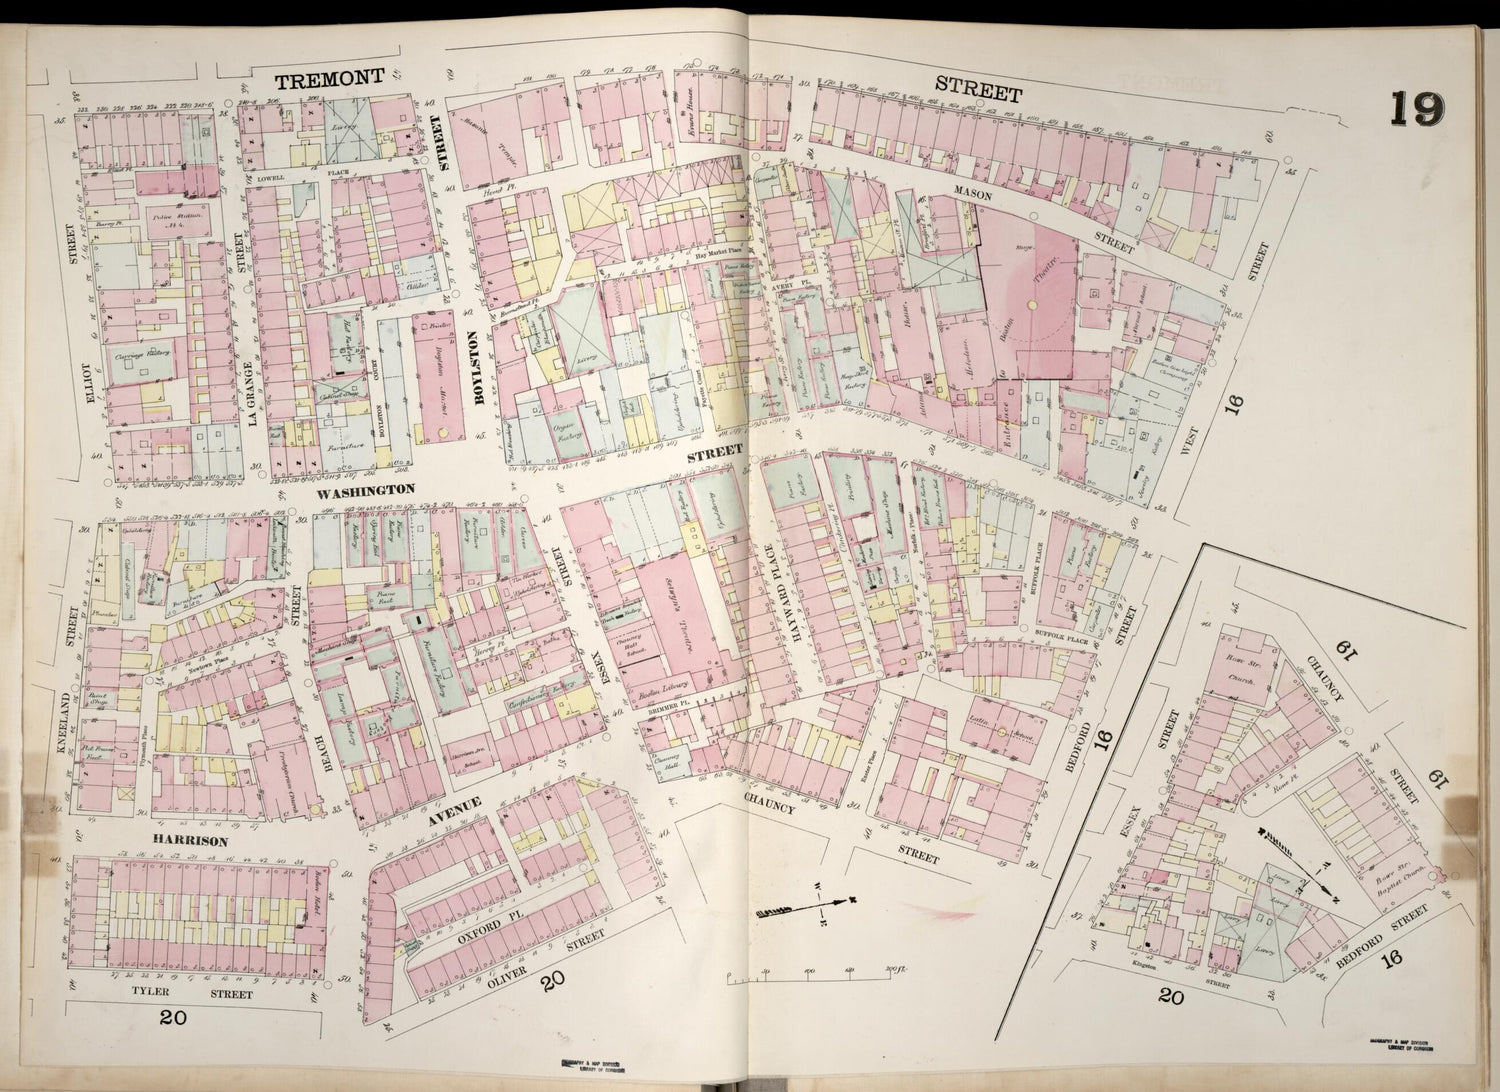 This old map of Image 20 of Boston from Insurance Map of Boston. Volume 1 from 1867 was created by D. A. (Daniel Alfred) Sanborn in 1867